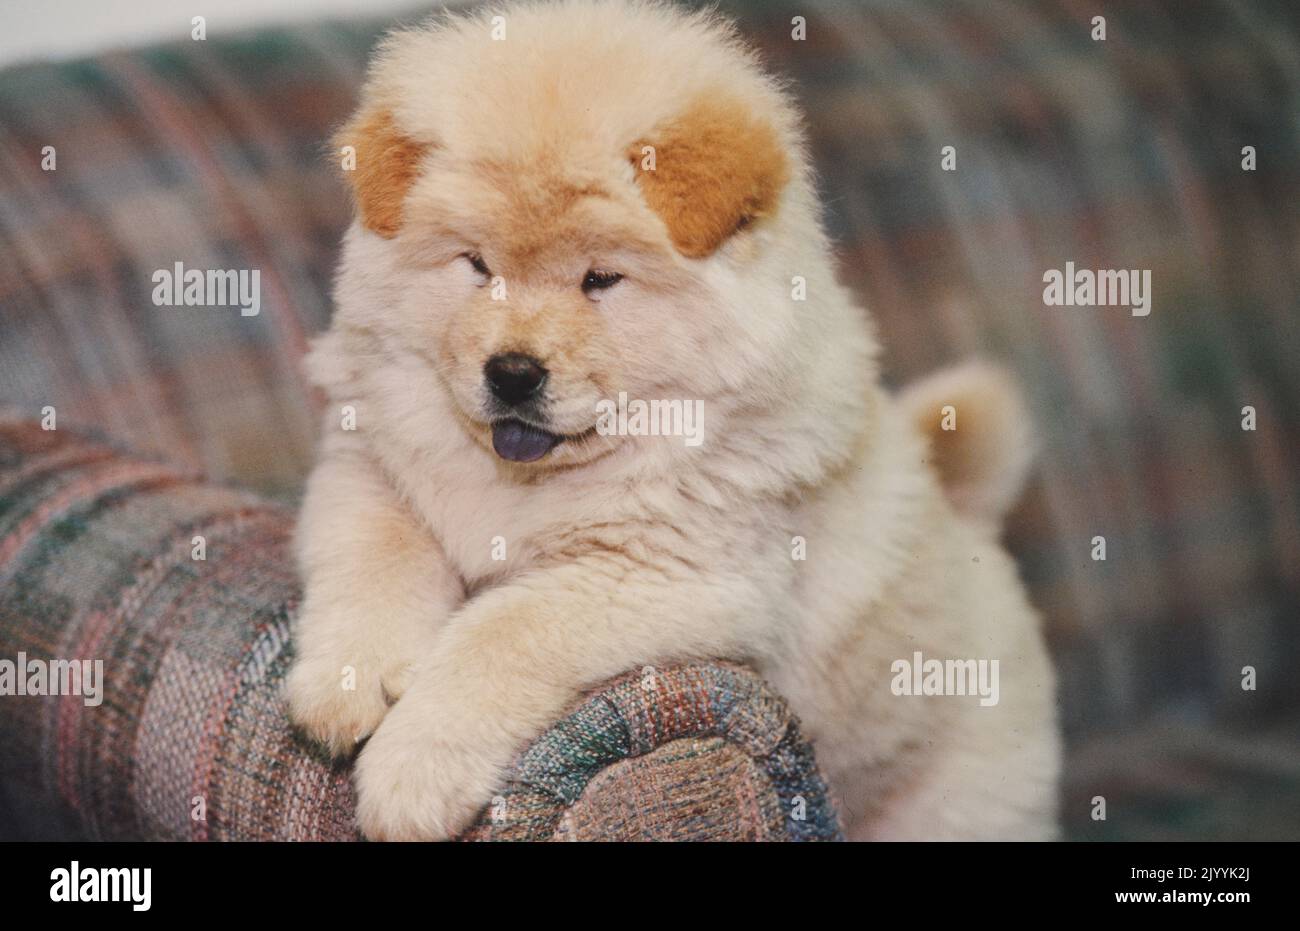 Chow puppy on couch Stock Photo